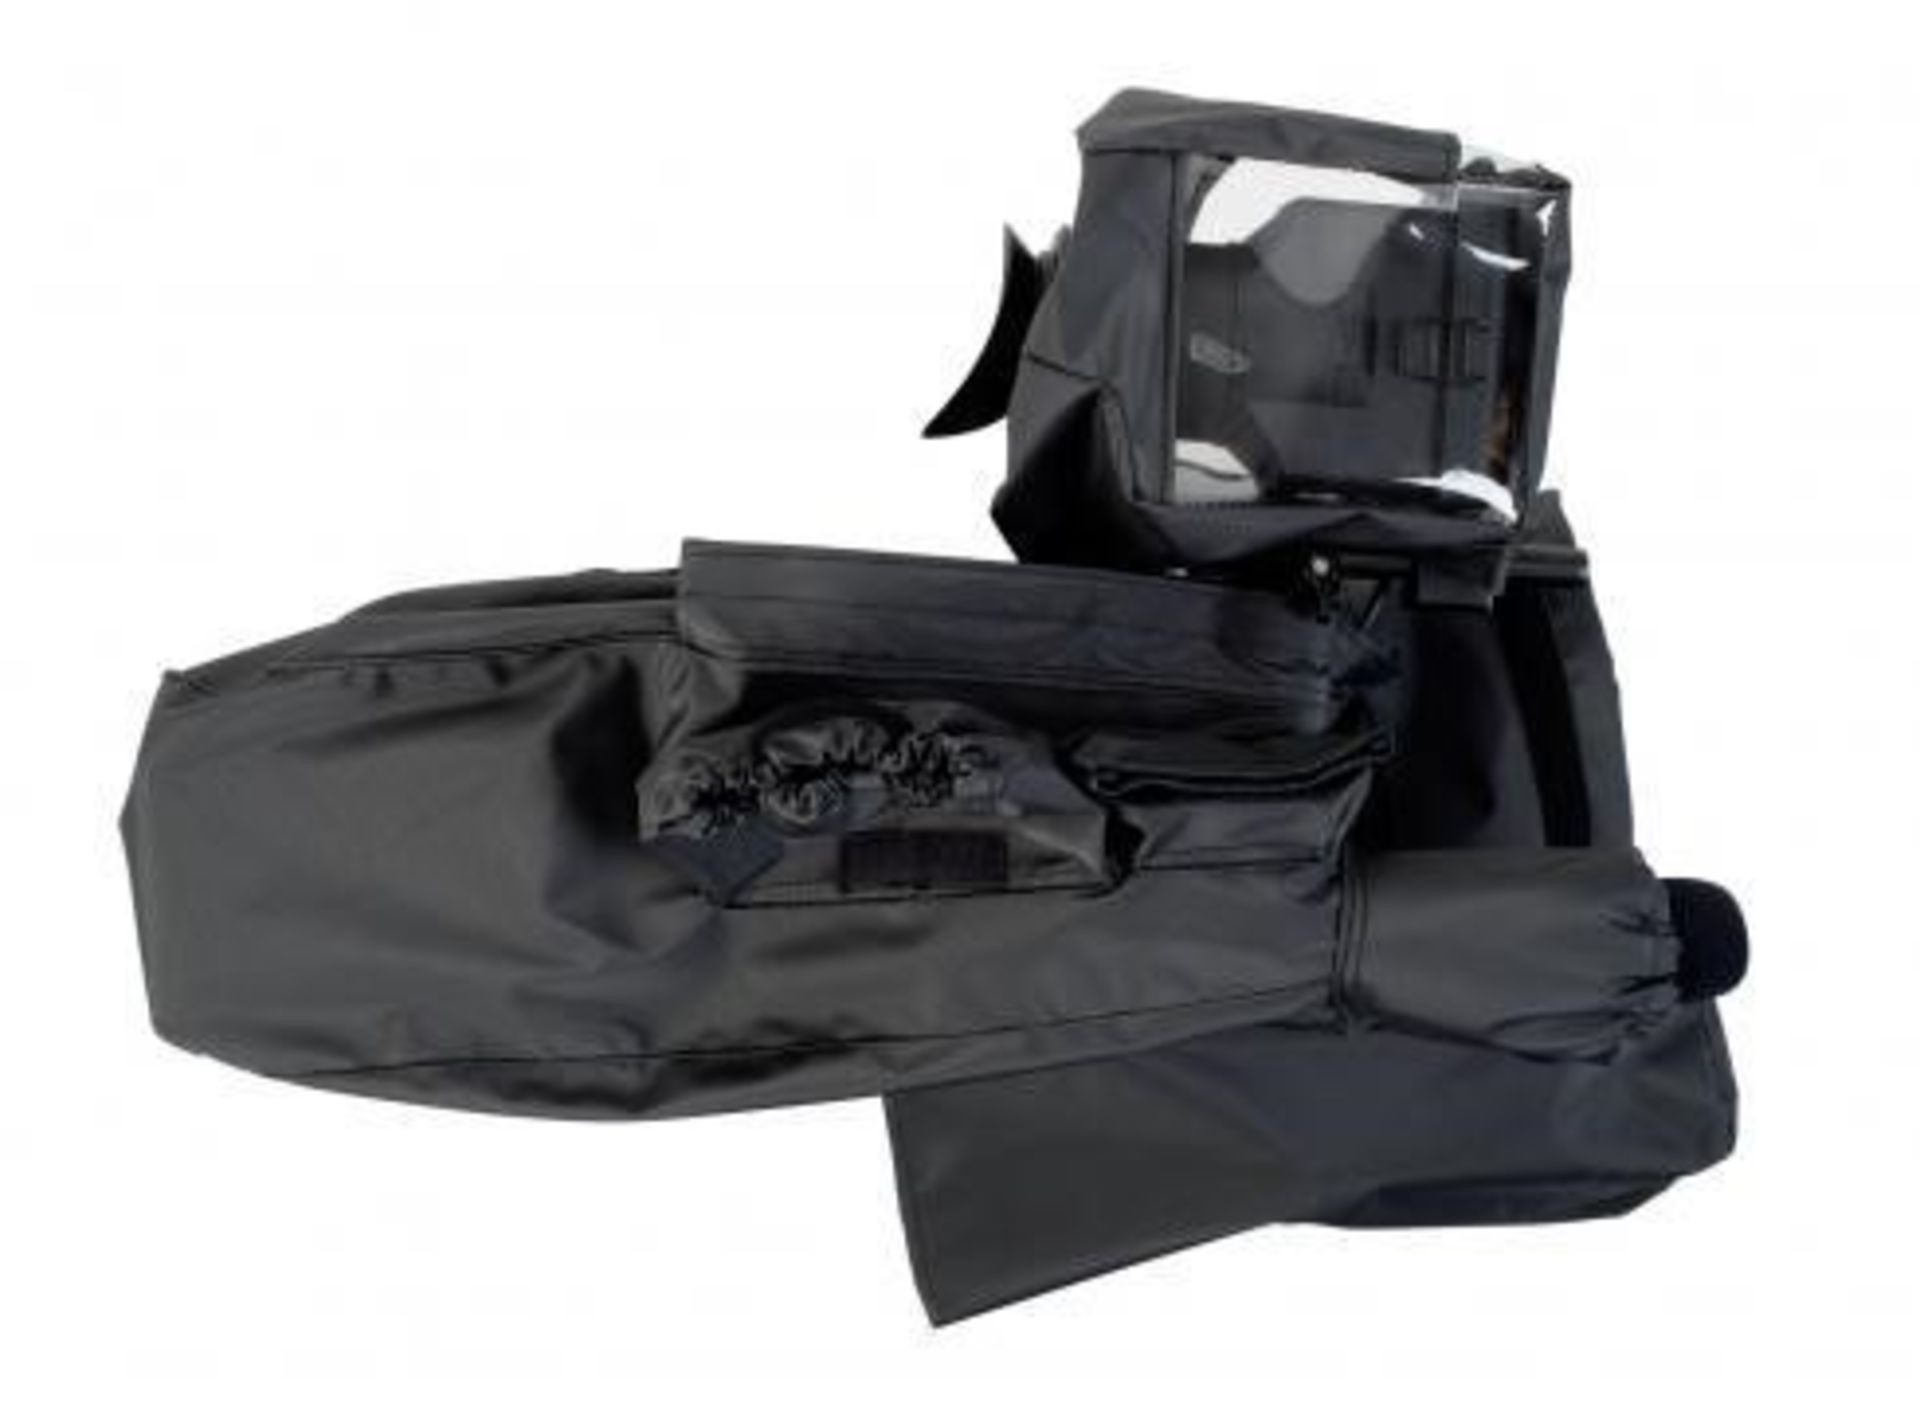 CAMRADE WET SUIT RAIN COVER FOR SONY FS7